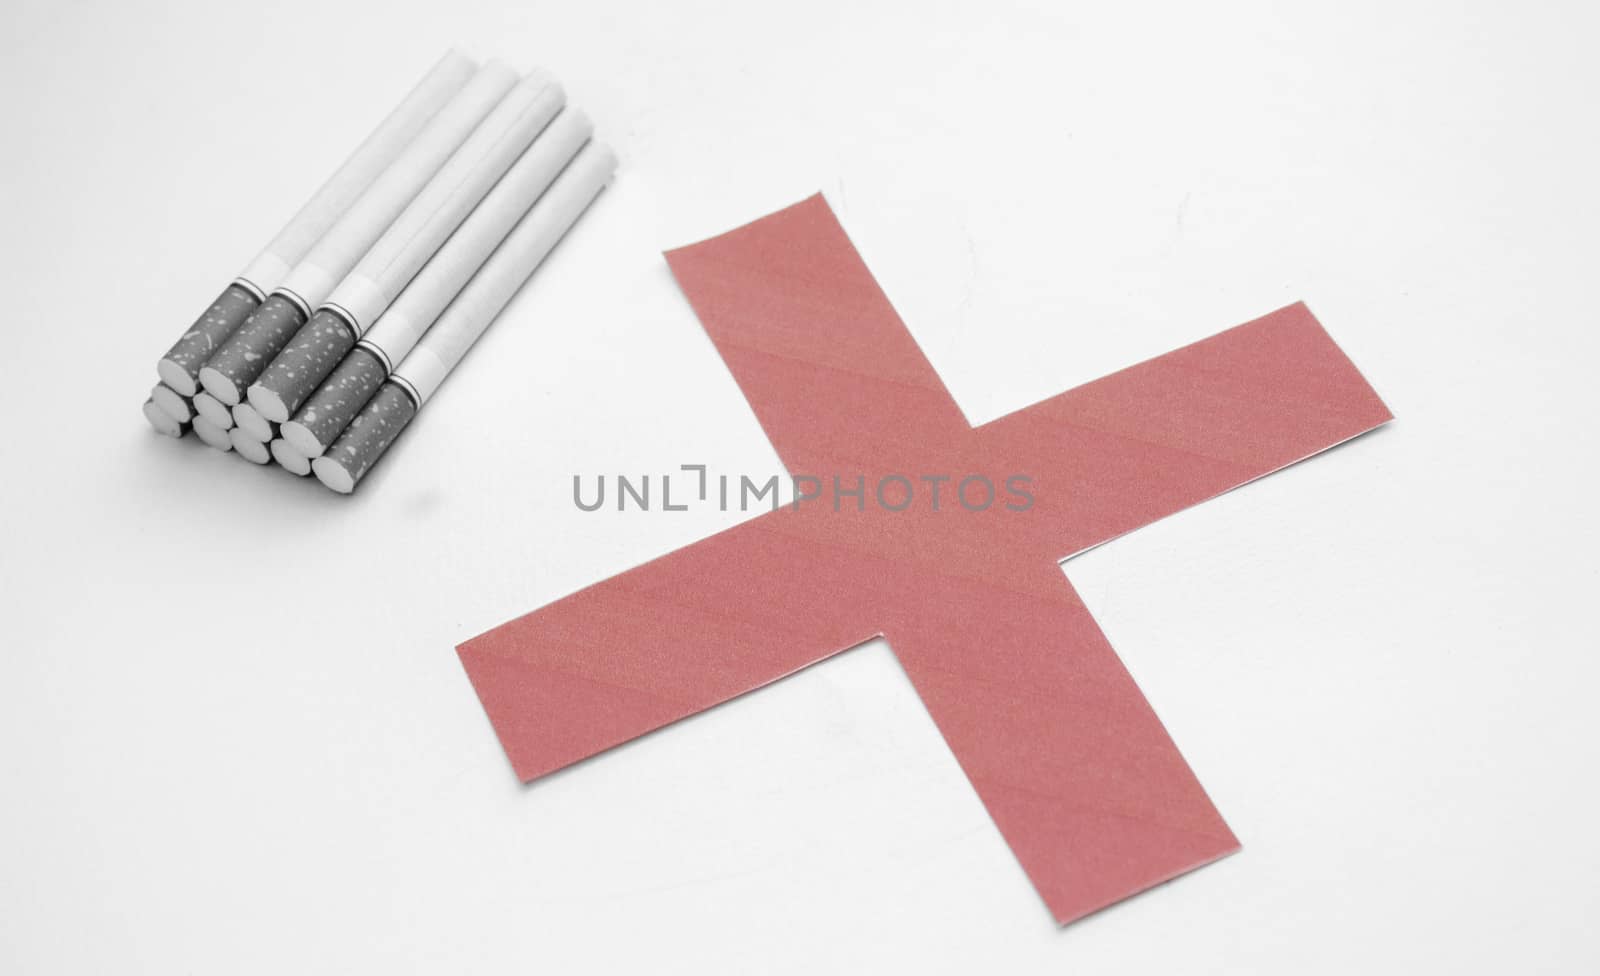 World No Tobacco Day; Heap of cigarettes with filter isolated on white background and Red cross symbol.